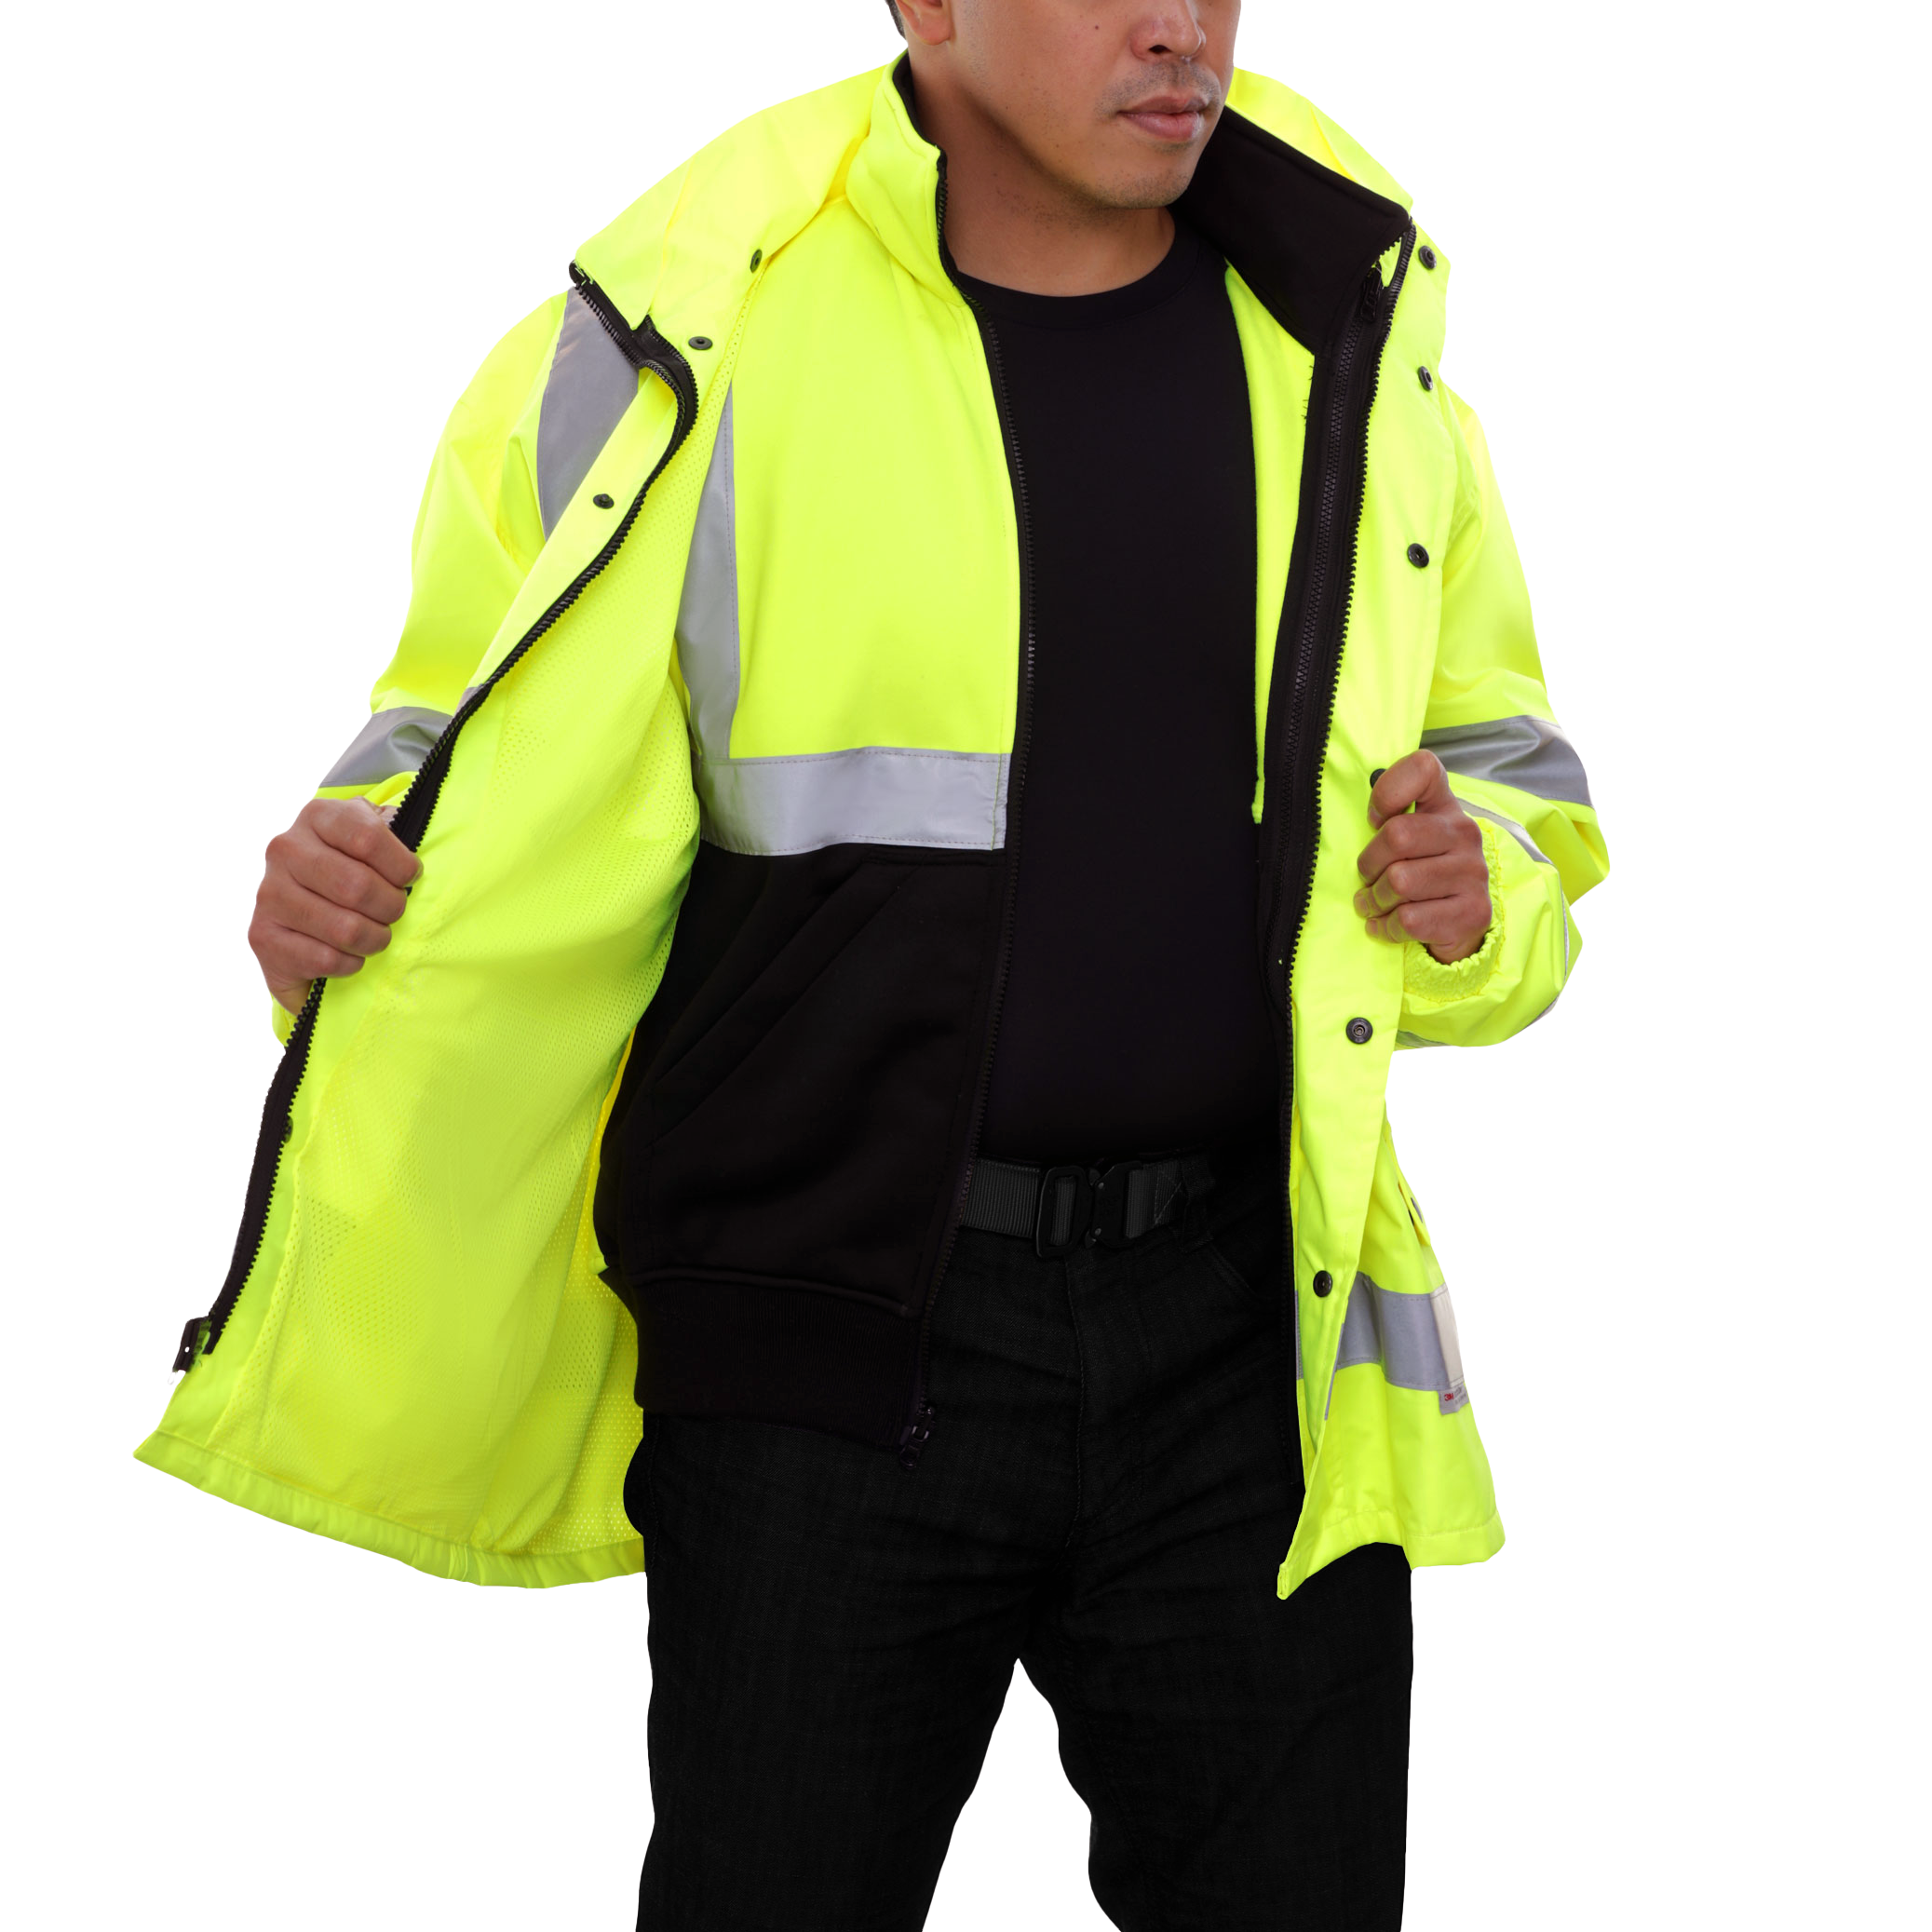 Safety Jacket Hi Vis Parka Breathable Waterproof Hooded Lime-eSafety Supplies, Inc